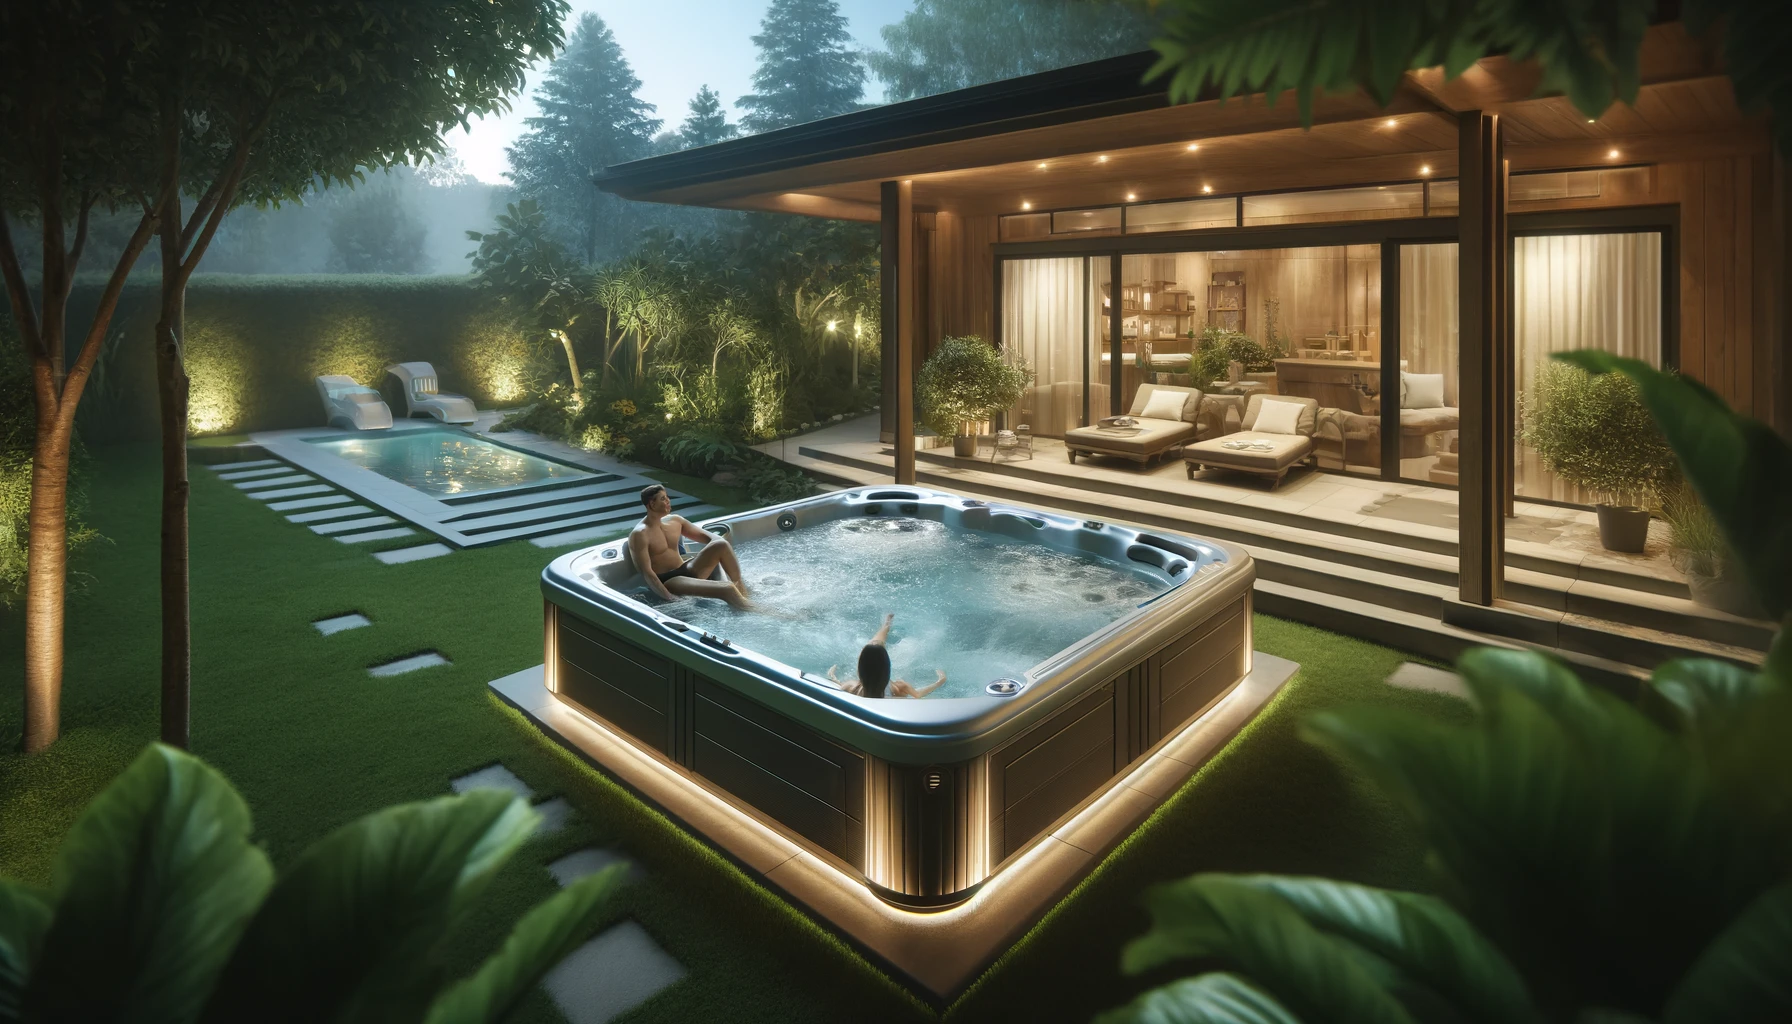 A luxurious backyard setting featuring a Beachcomber hot tub. The scene shows the hot tub on a beautifully landscaped patio with lush greenery around